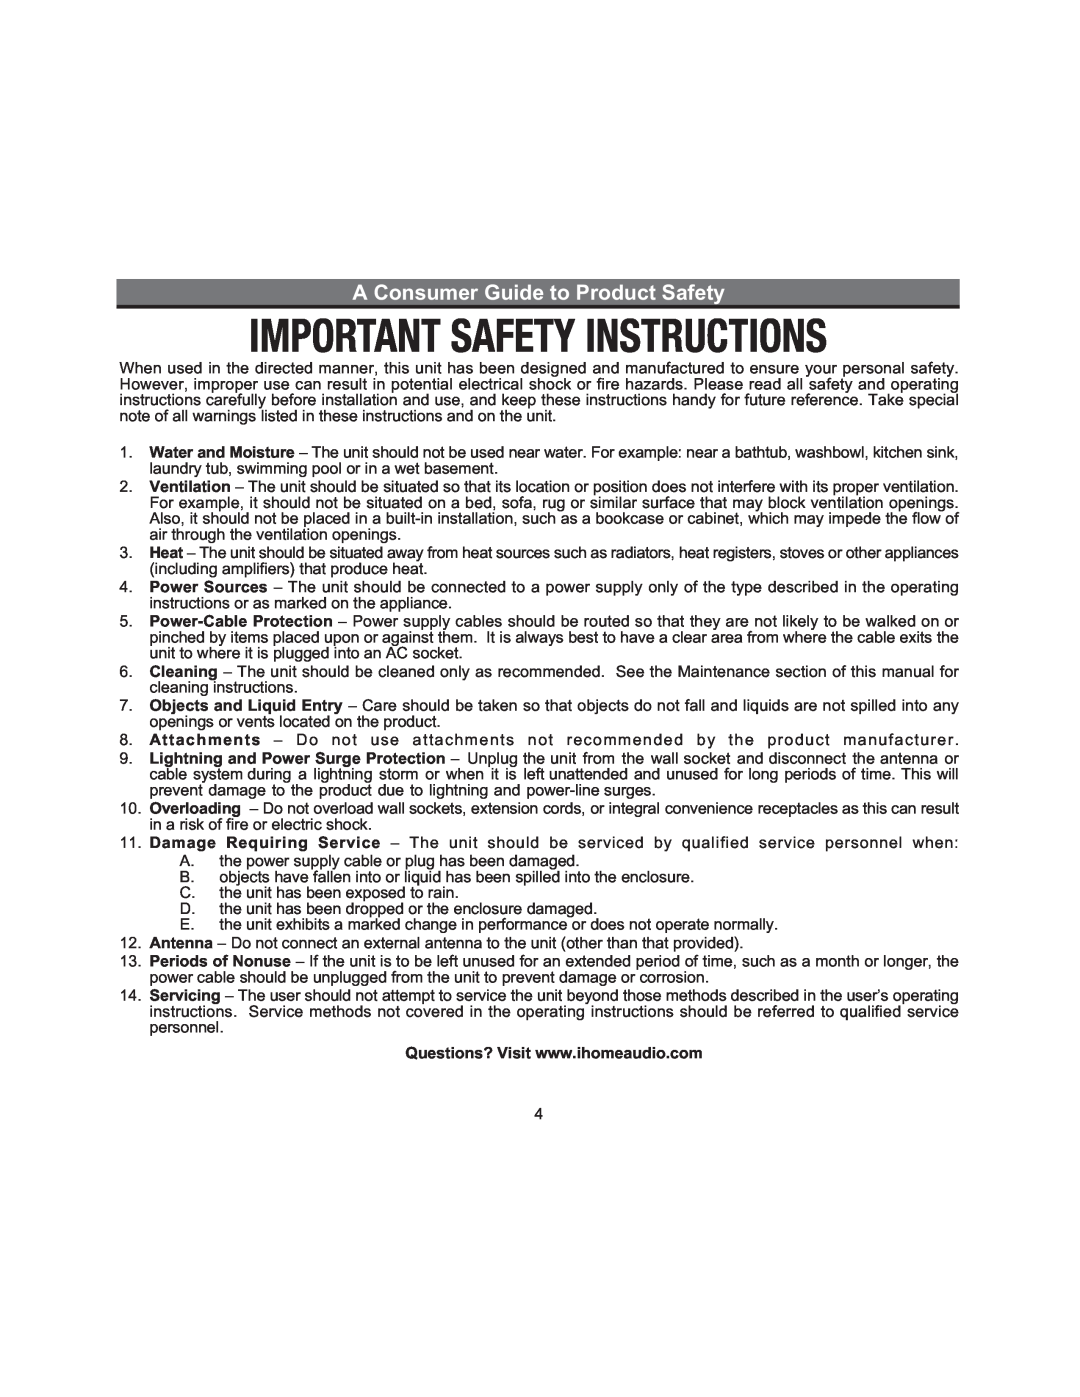 iHome ZN14, ZN10 manual A Consumer Guide to Product Safety 